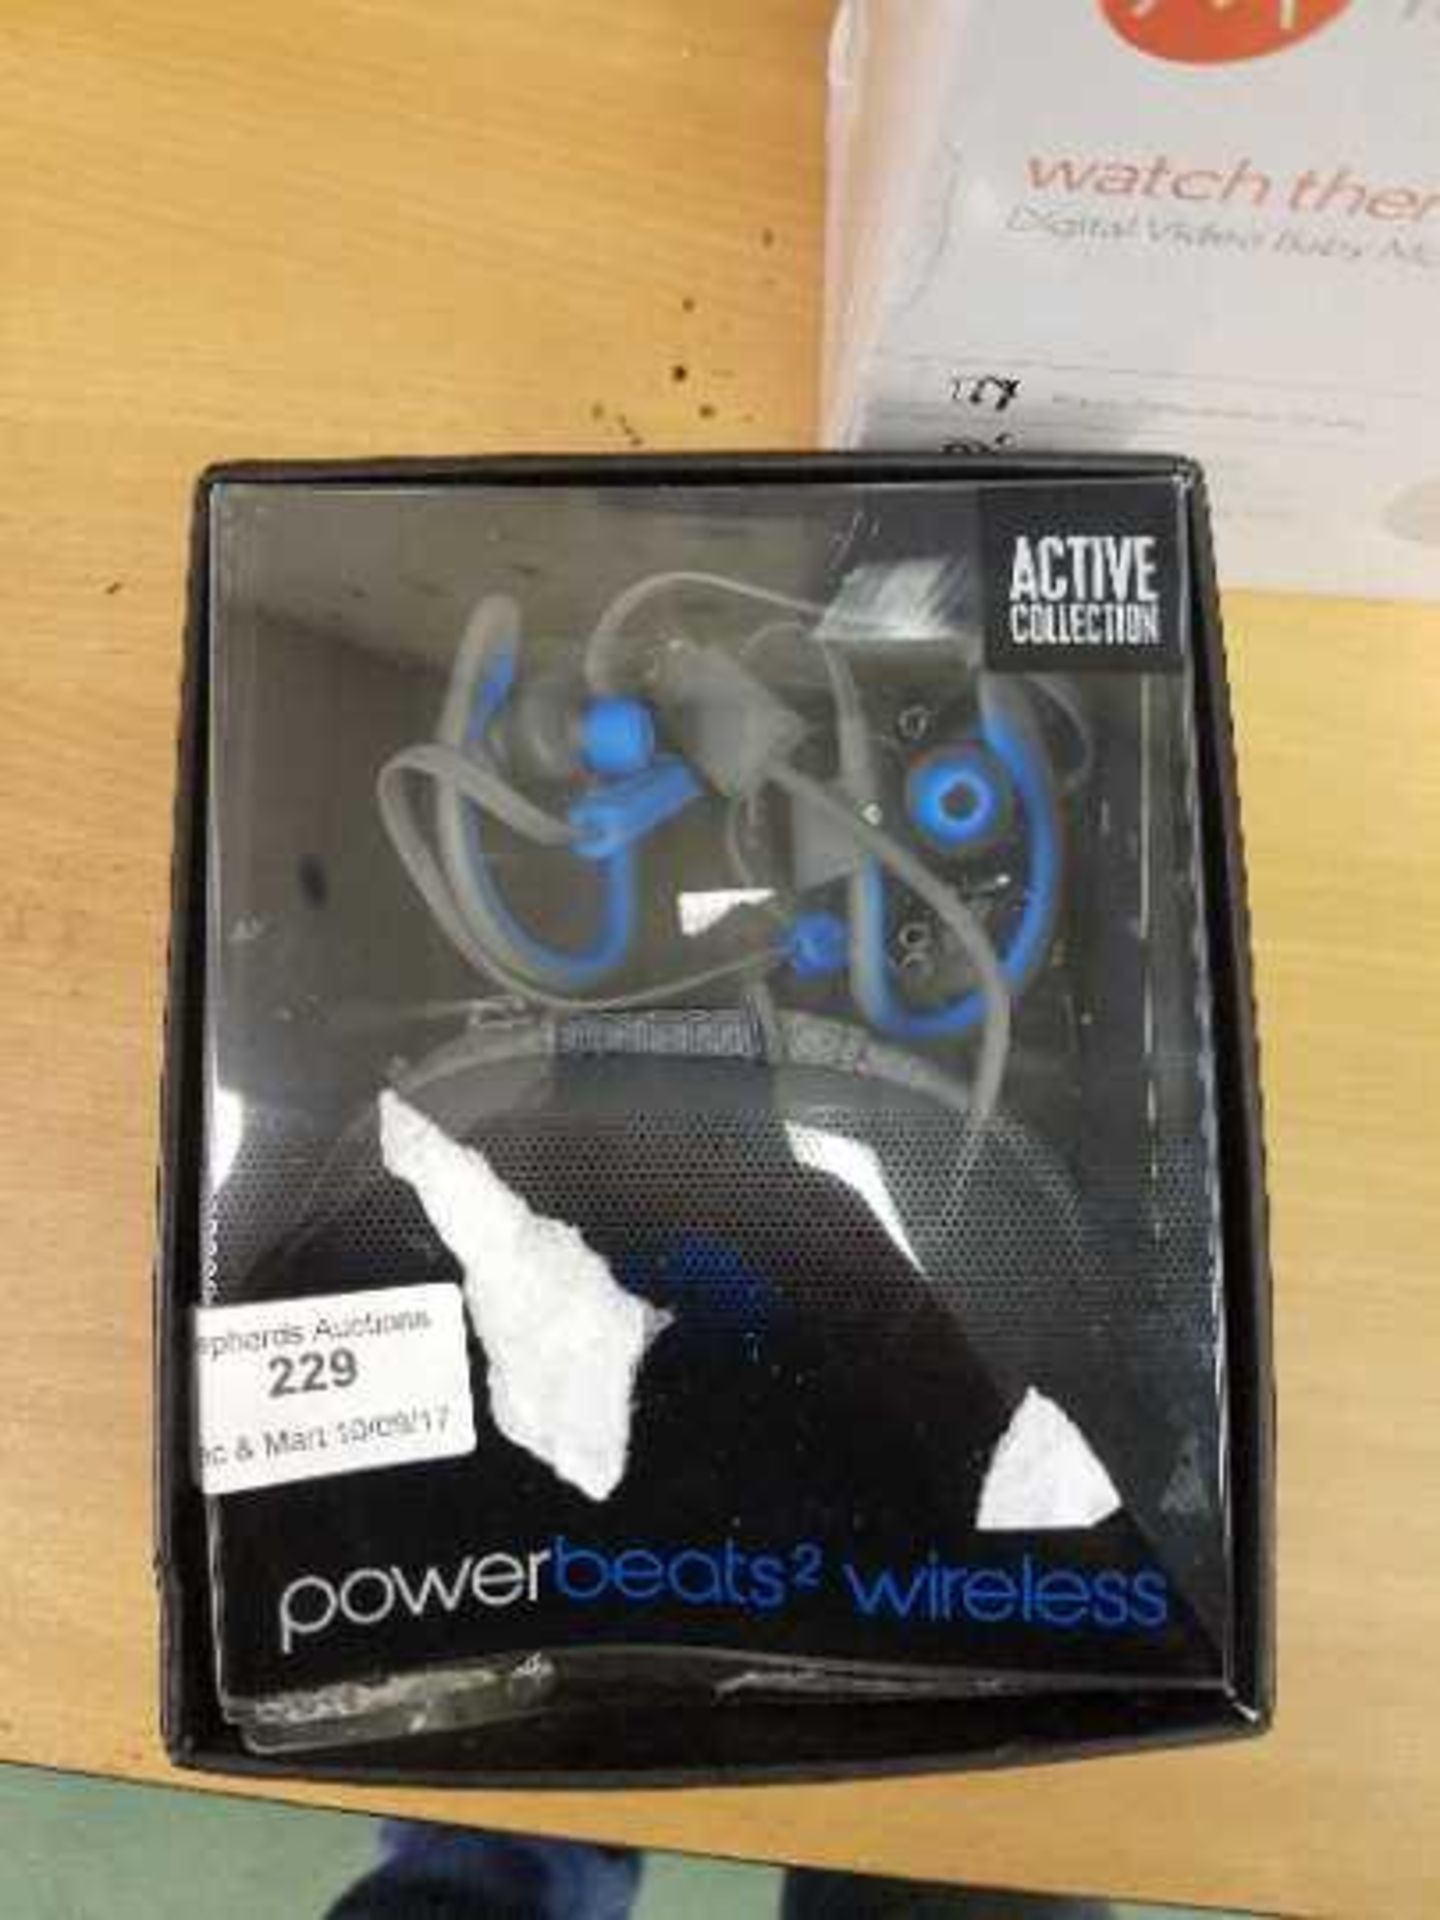 Power Beats 2 wireless earphones, no power but may just need charging, in original box with charging